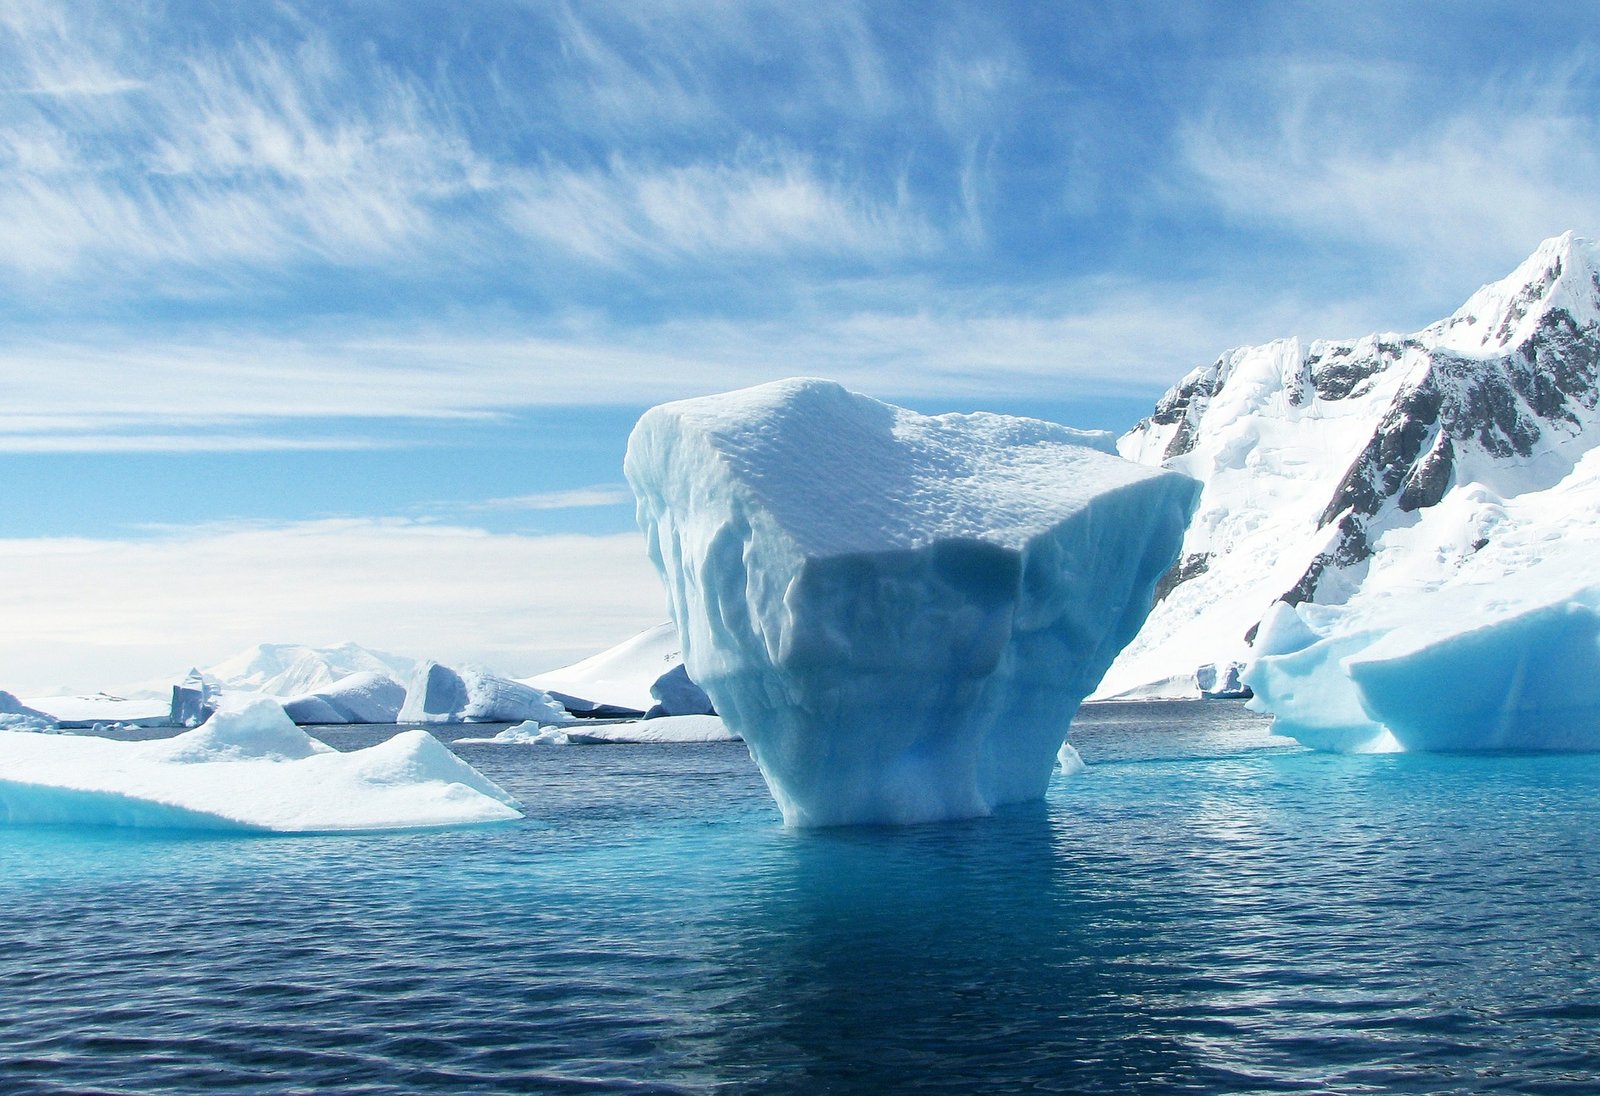 152 billion tons of fresh water are released into the ocean by a massive iceberg.